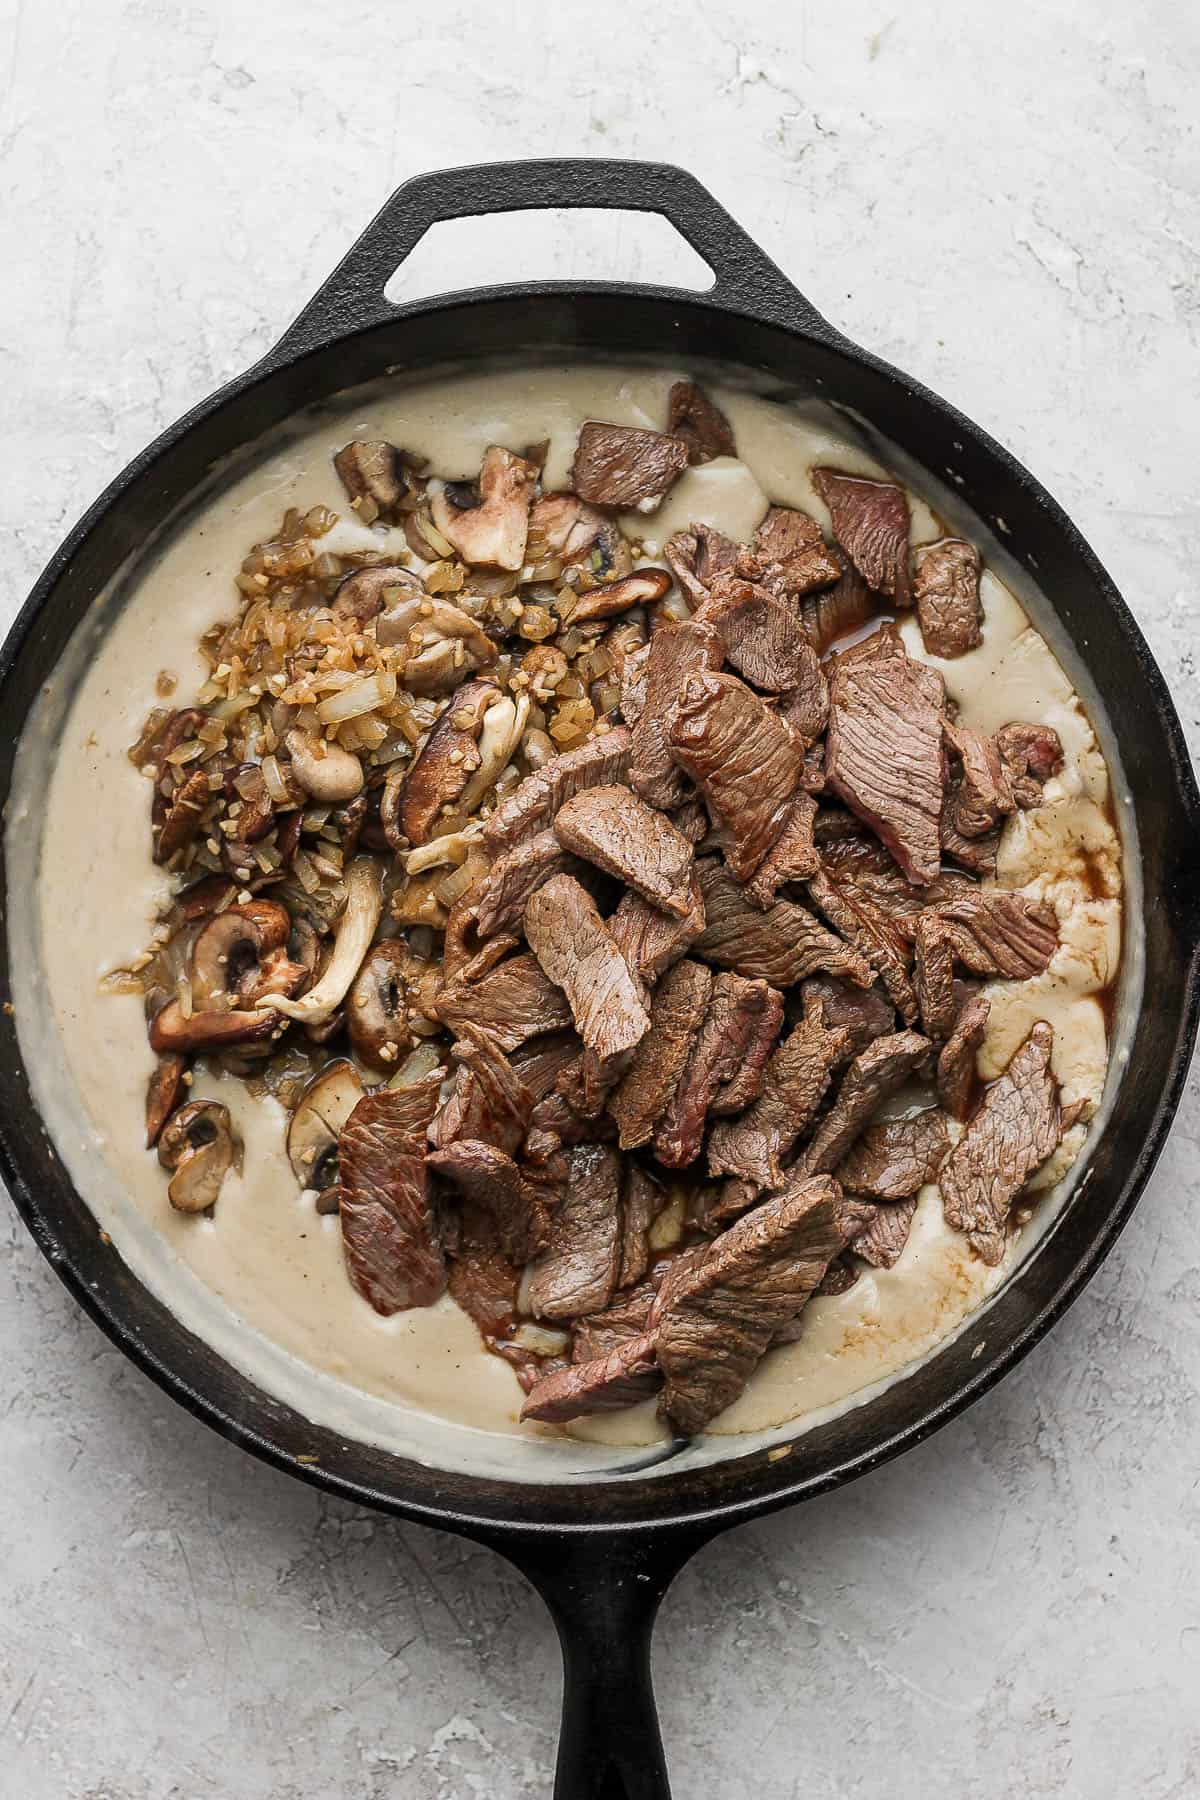 The seared two-inch strips of sirloin steak and mushroom, garlic, and onion mixture added back into the cast iron skillet that holds the roux.